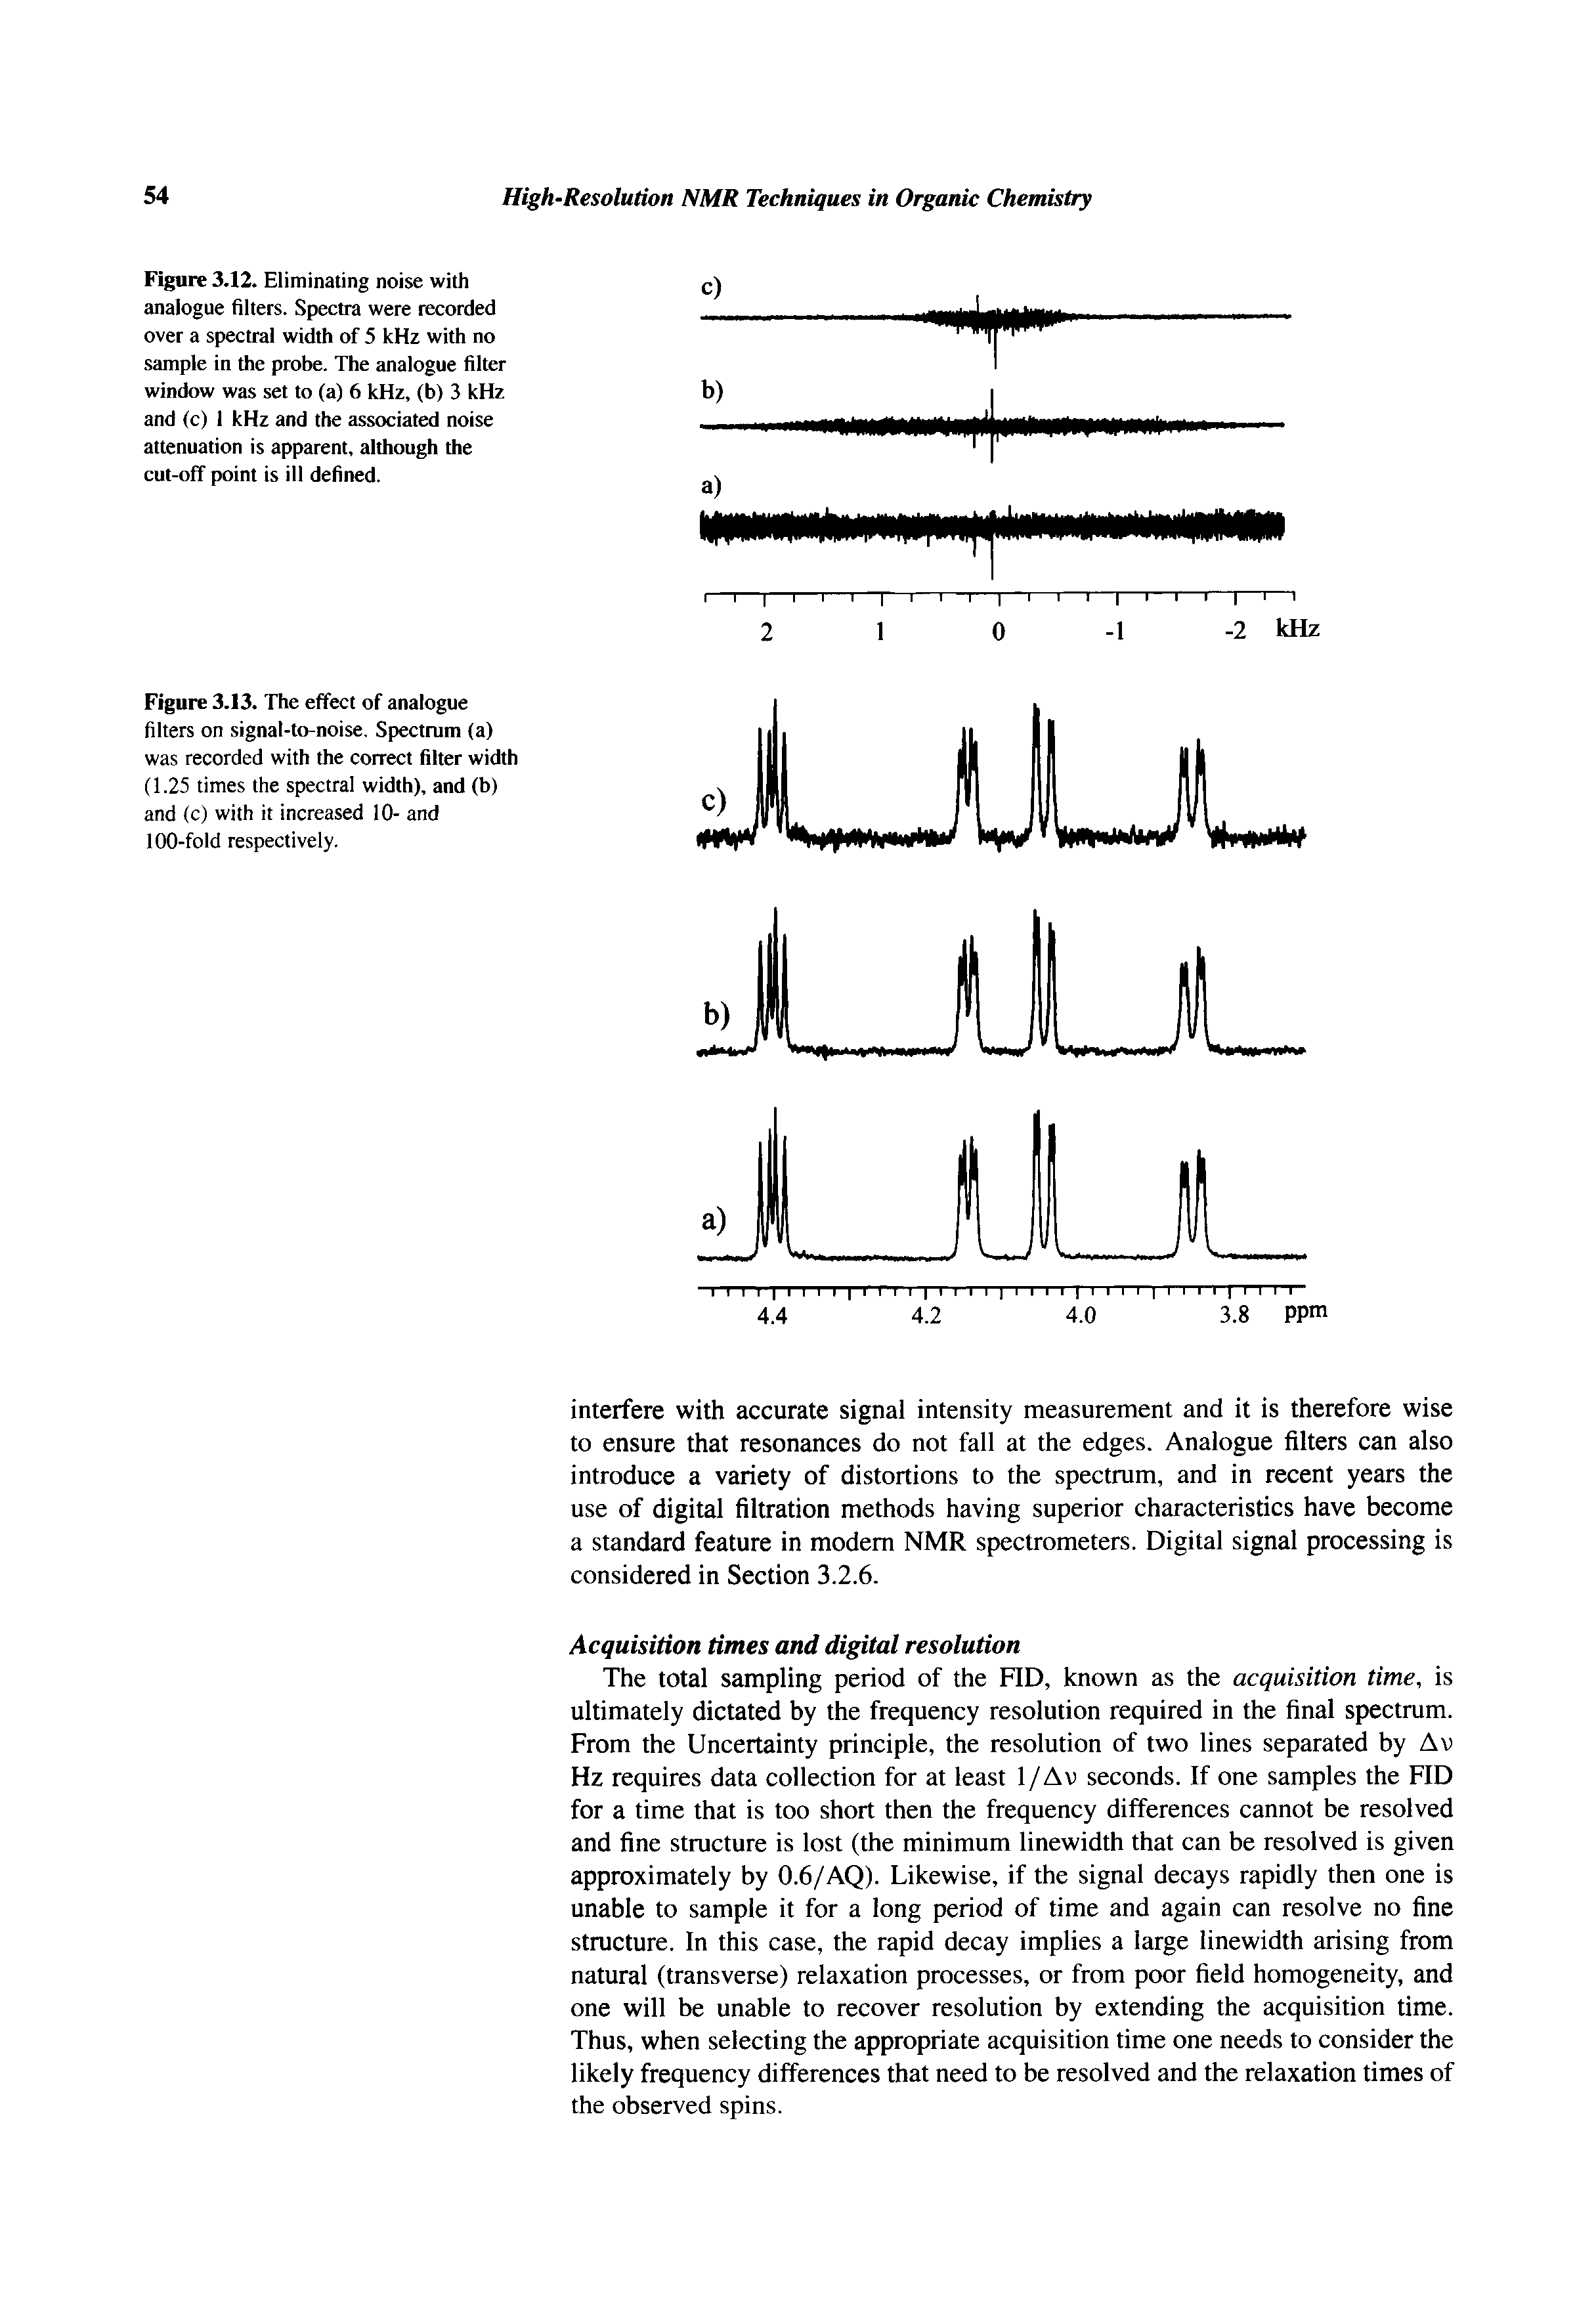 Figure 3.13. The effect of analogue filters on signal-to-noise. Spectrum (a) was recorded with the correct filter width (1.25 times the spectral width), and (b) and (c) with it increased 10- and 100-fold respectively.